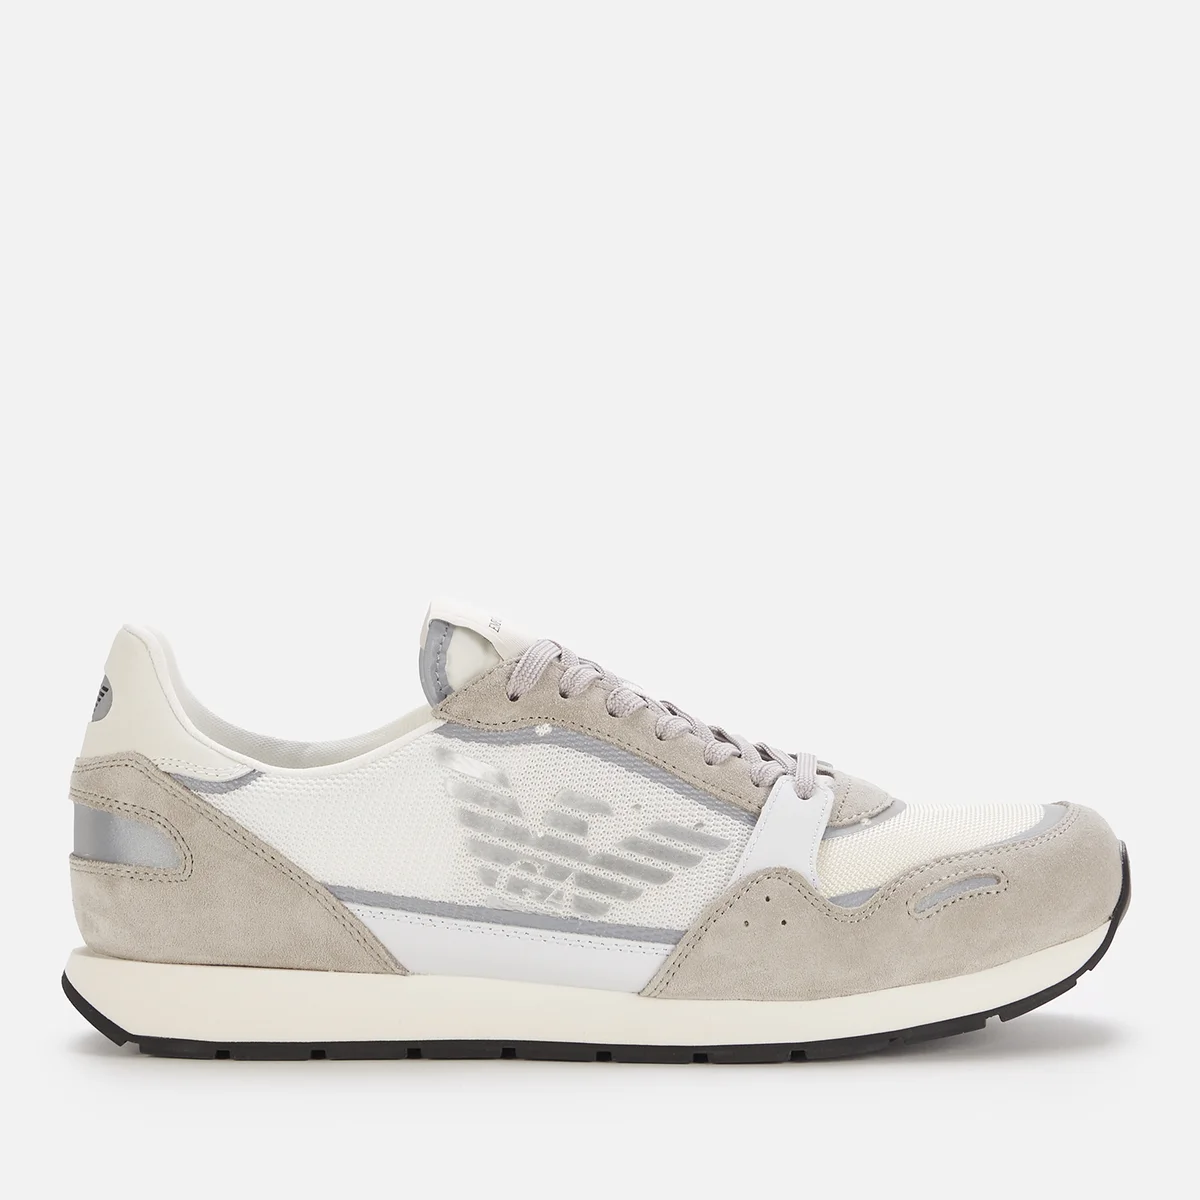 Emporio Armani Men's Fire Suede Running Style Trainers - Grey/Off White Image 1